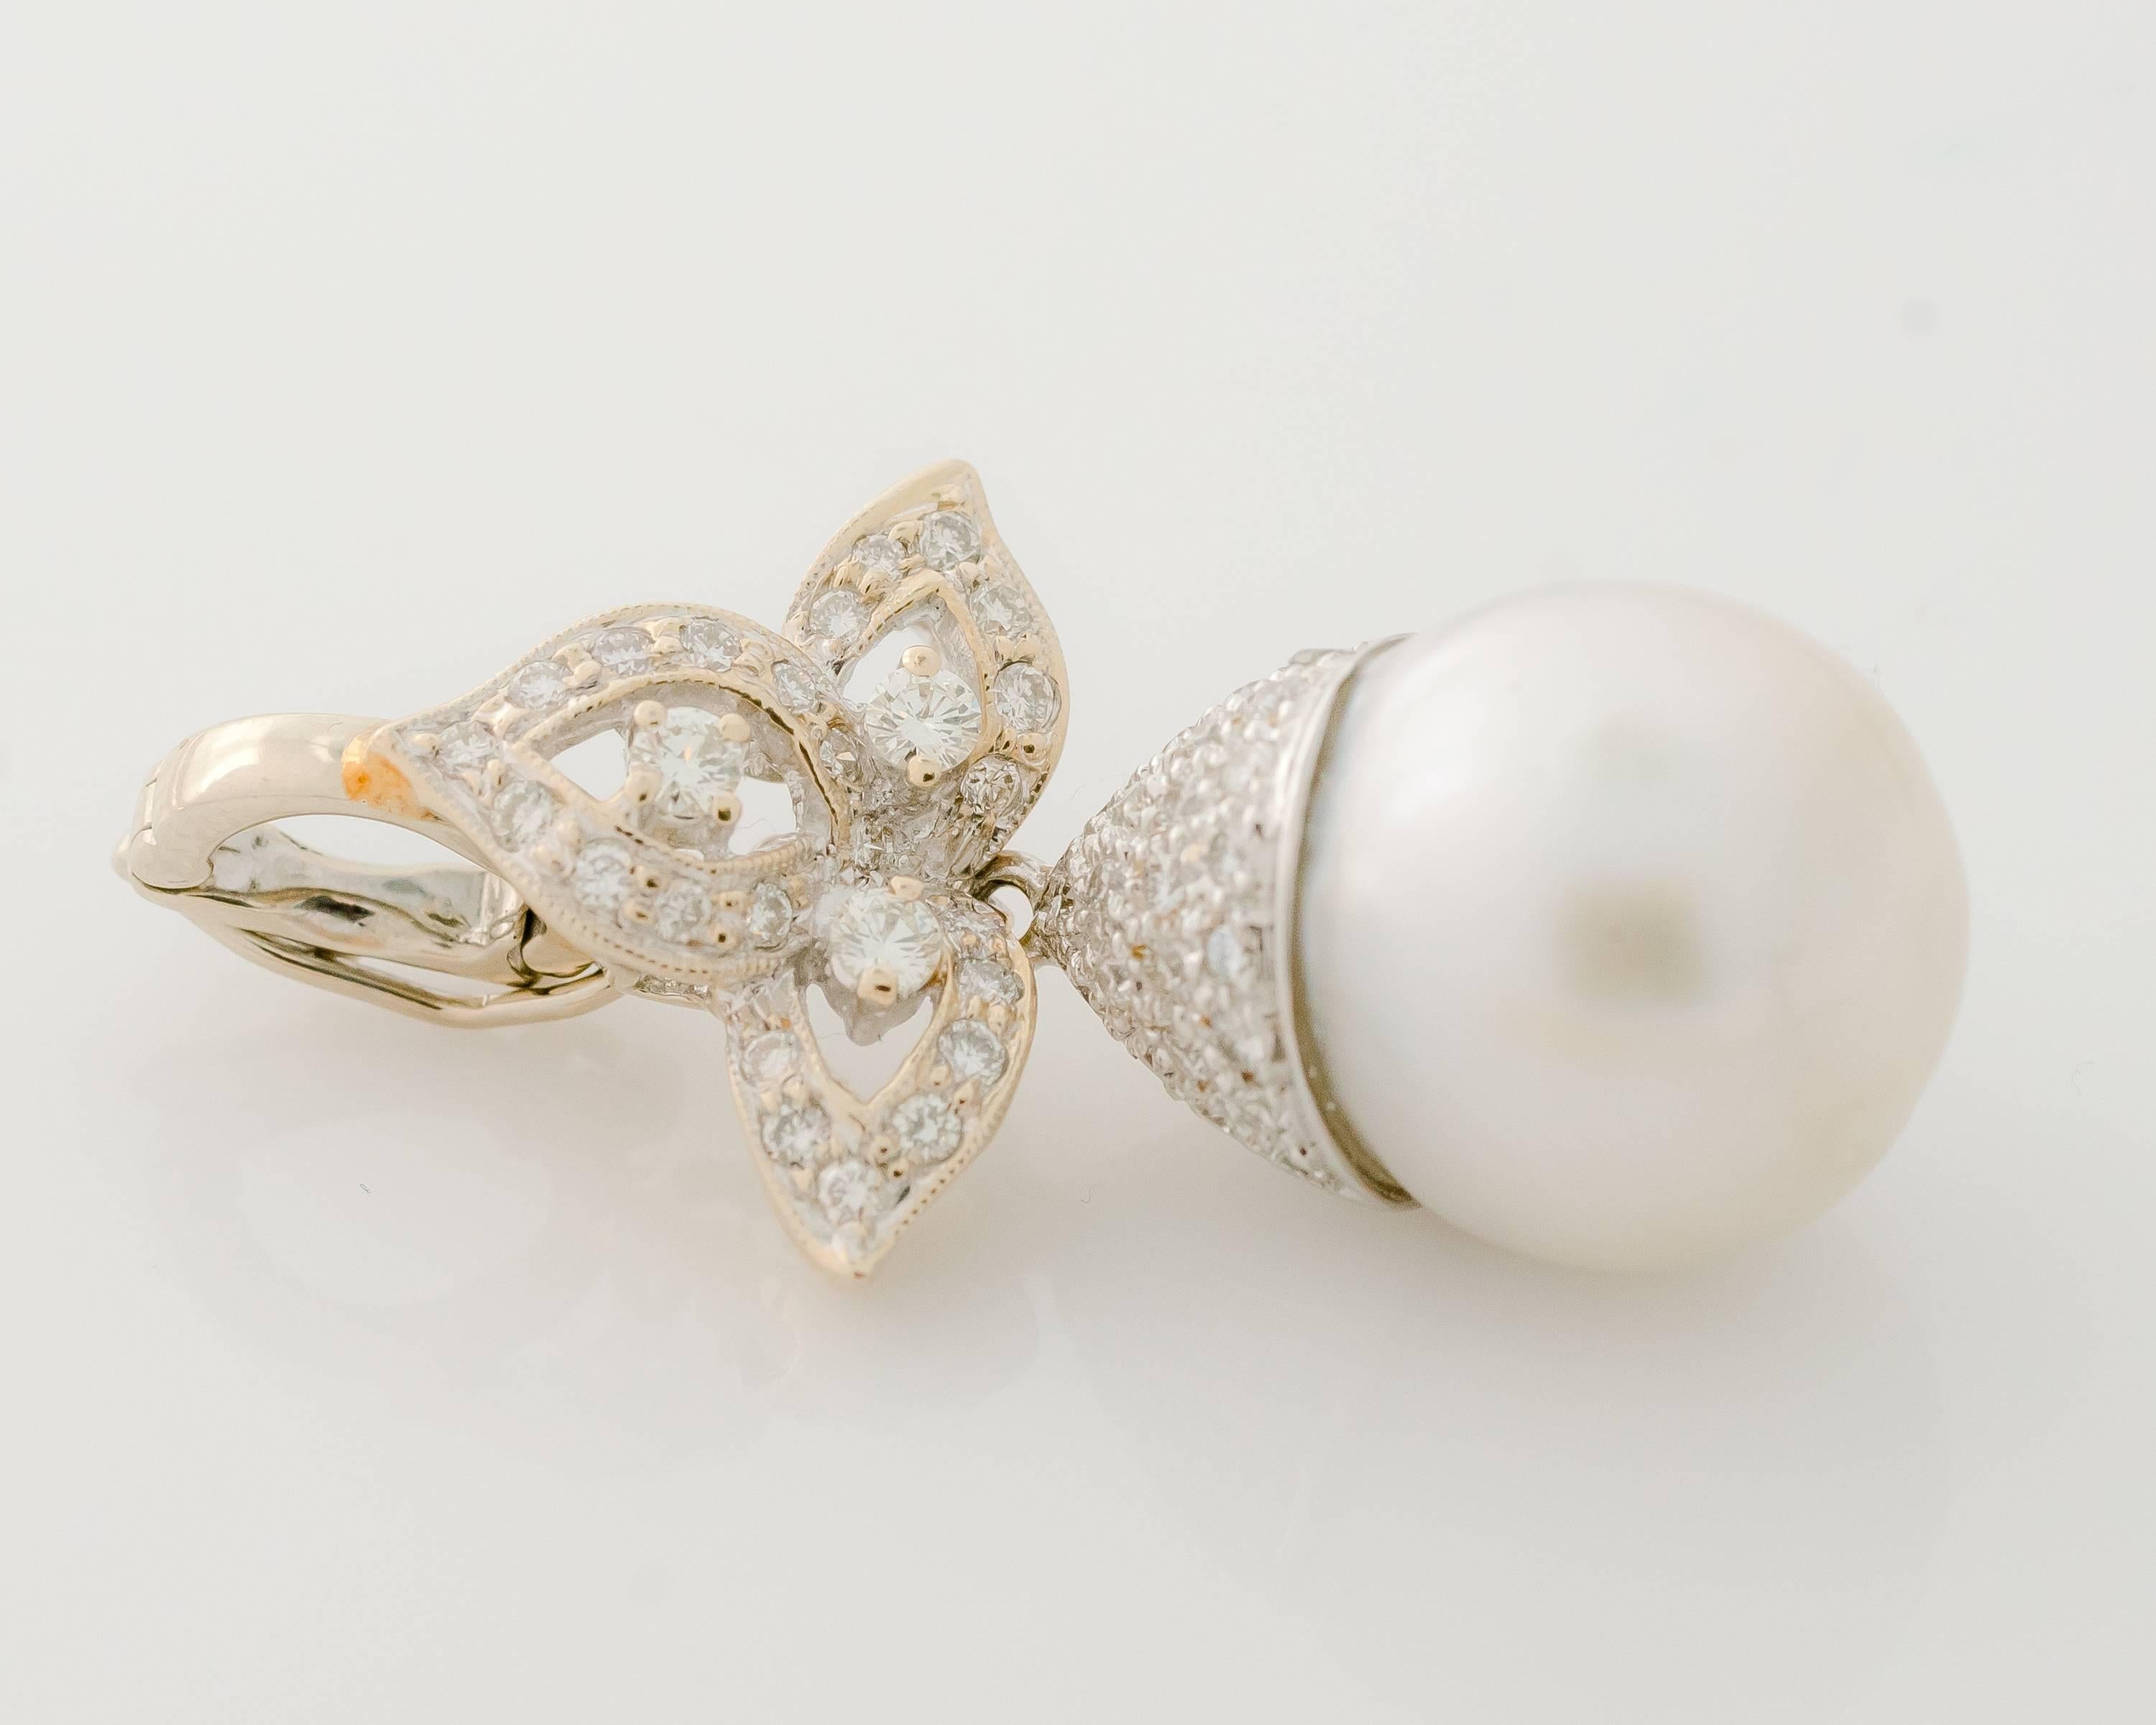 This 1980s Diamond and Pearl Pendant features a 13.5 millimeter grayish-white pearl topped with sparkling round brilliant diamonds set in 14 karat white gold. The articulated pendant features a leaf-motif, diamond encrusted upper half which has a